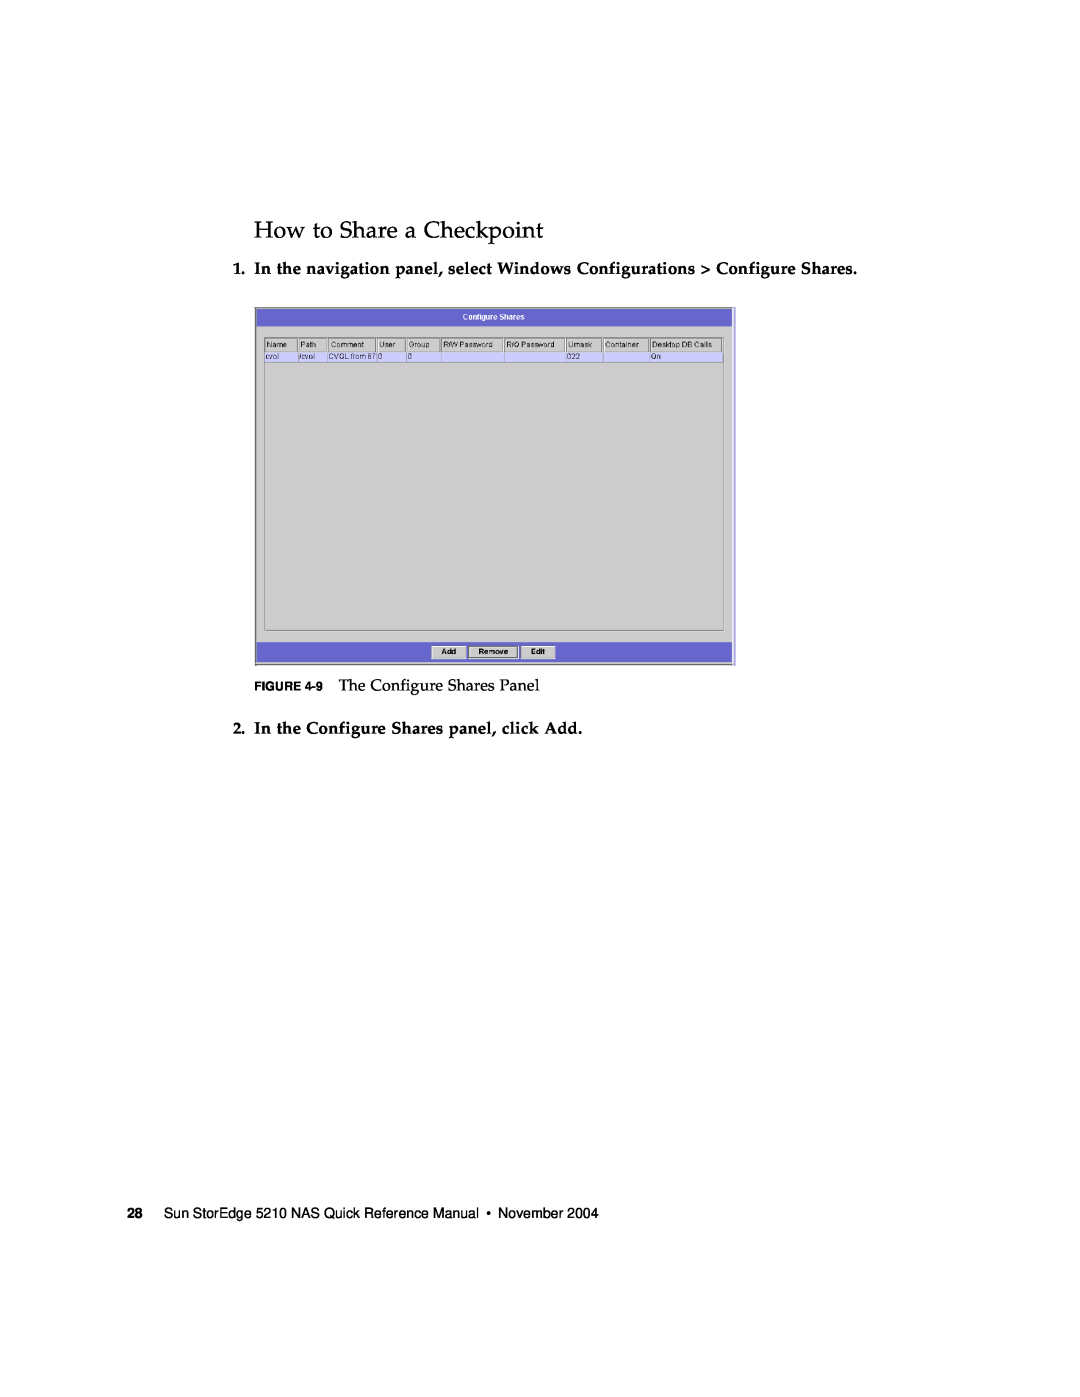 Sun Microsystems 5210 NAS manual How to Share a Checkpoint, In the Configure Shares panel, click Add 